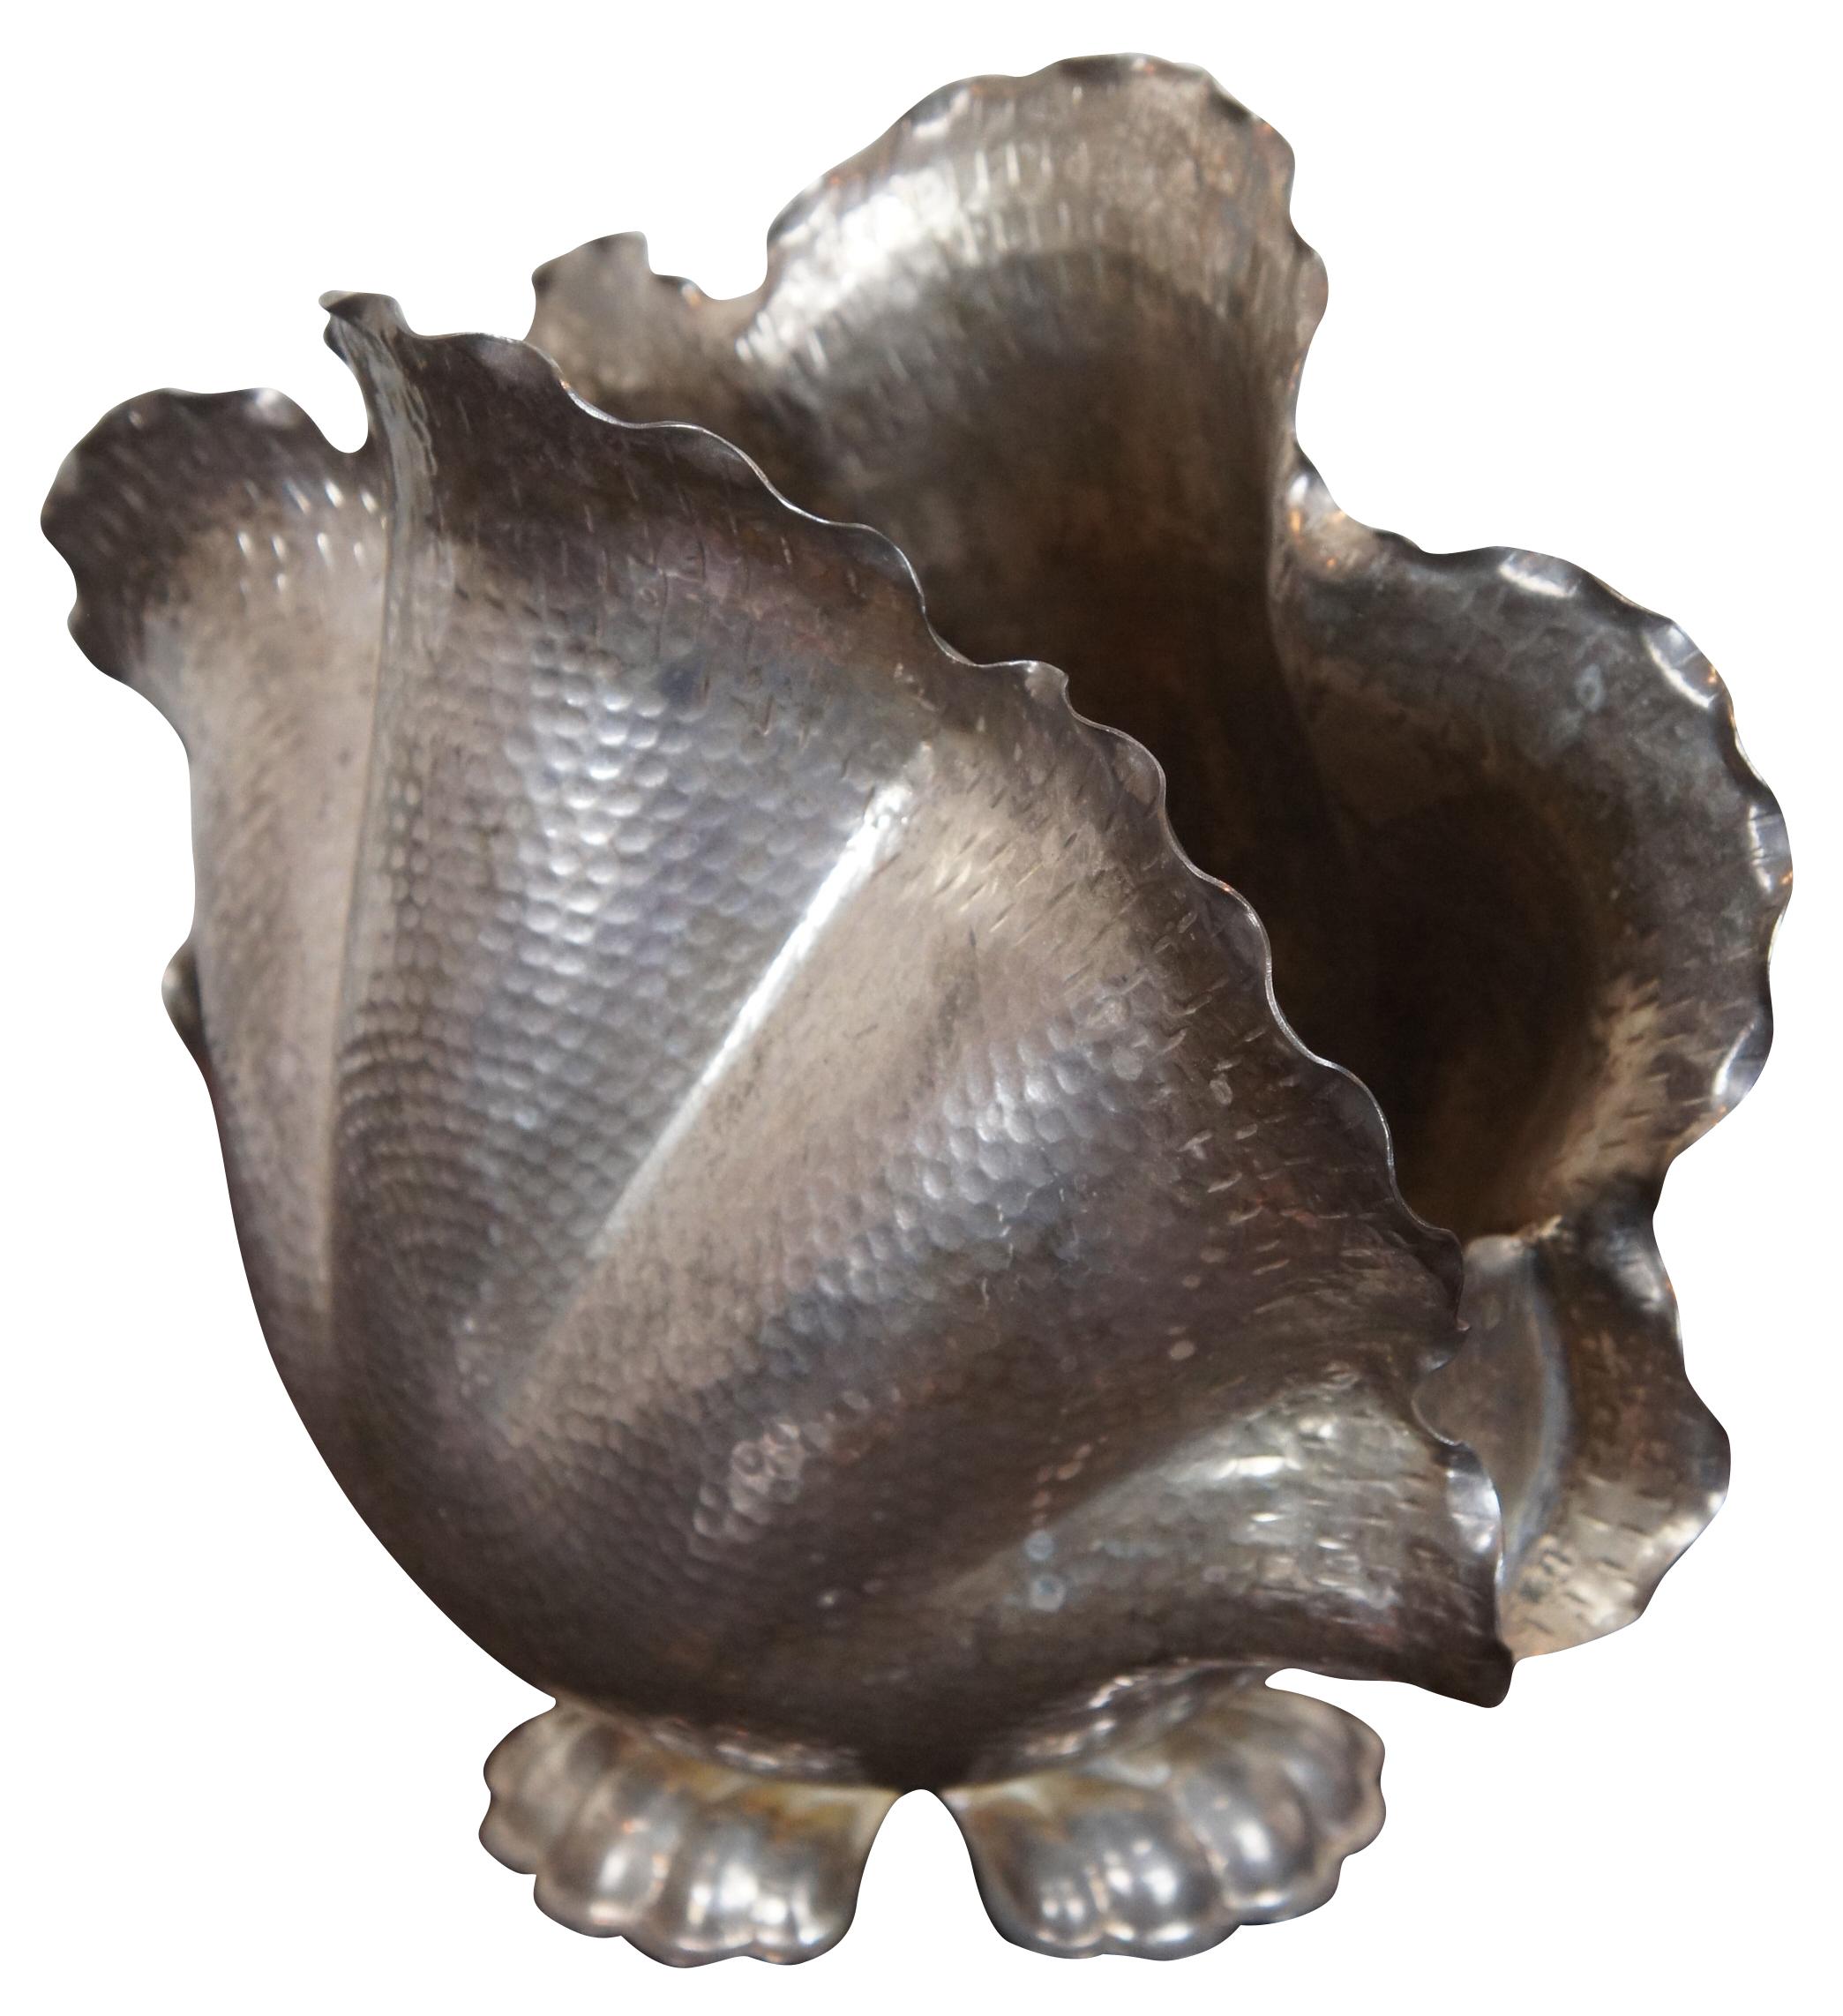 Vintage hammered serpentine silver plate scalloped clam shell wine cooler or footed centerpiece vase. Made after and in the form of the original by Christian Dior. Measures: 11